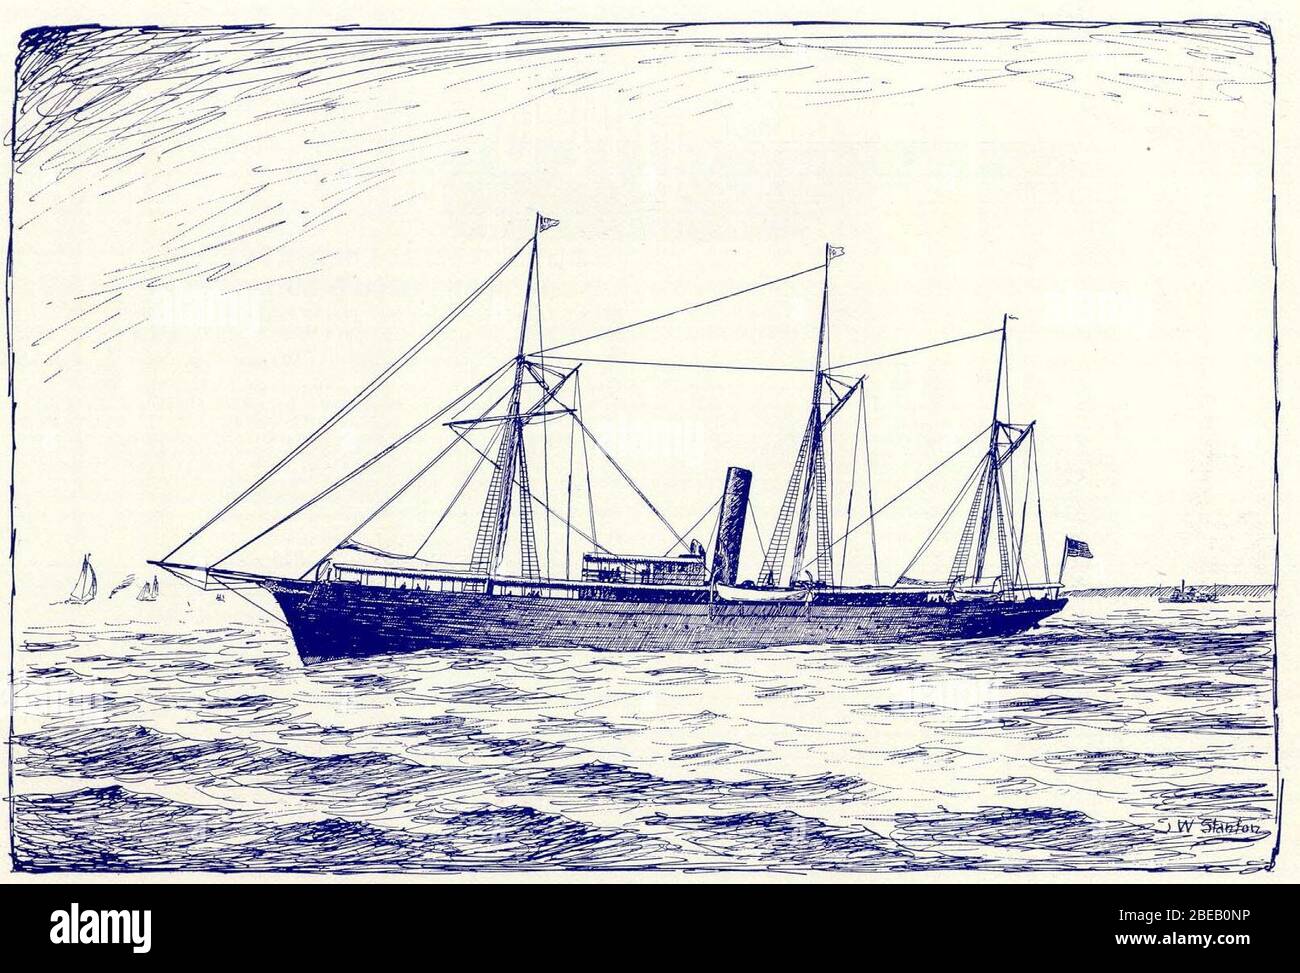 'English: Atalanta, steam yacht once owned by Jay Gould.; 1895 or before; American Steam Vessels, page 288, from image available on line from the Great Lakes Maritime Society; Samuel Ward Stanton (1870-1912); ' Stock Photo